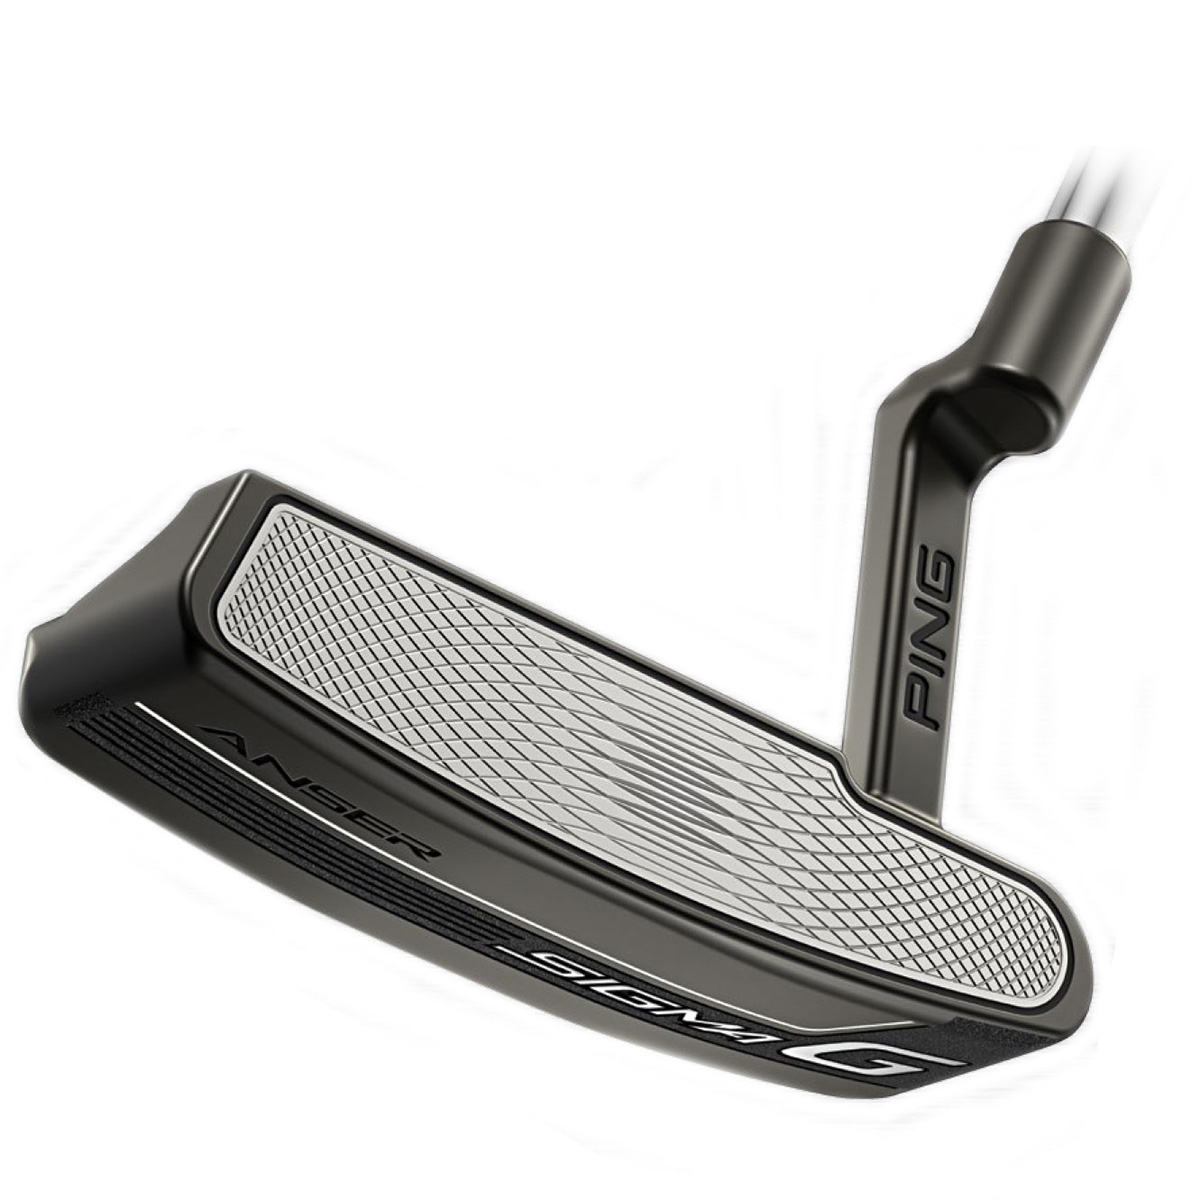 PING SIGMA G Anser Black Nickel Putter from american golf